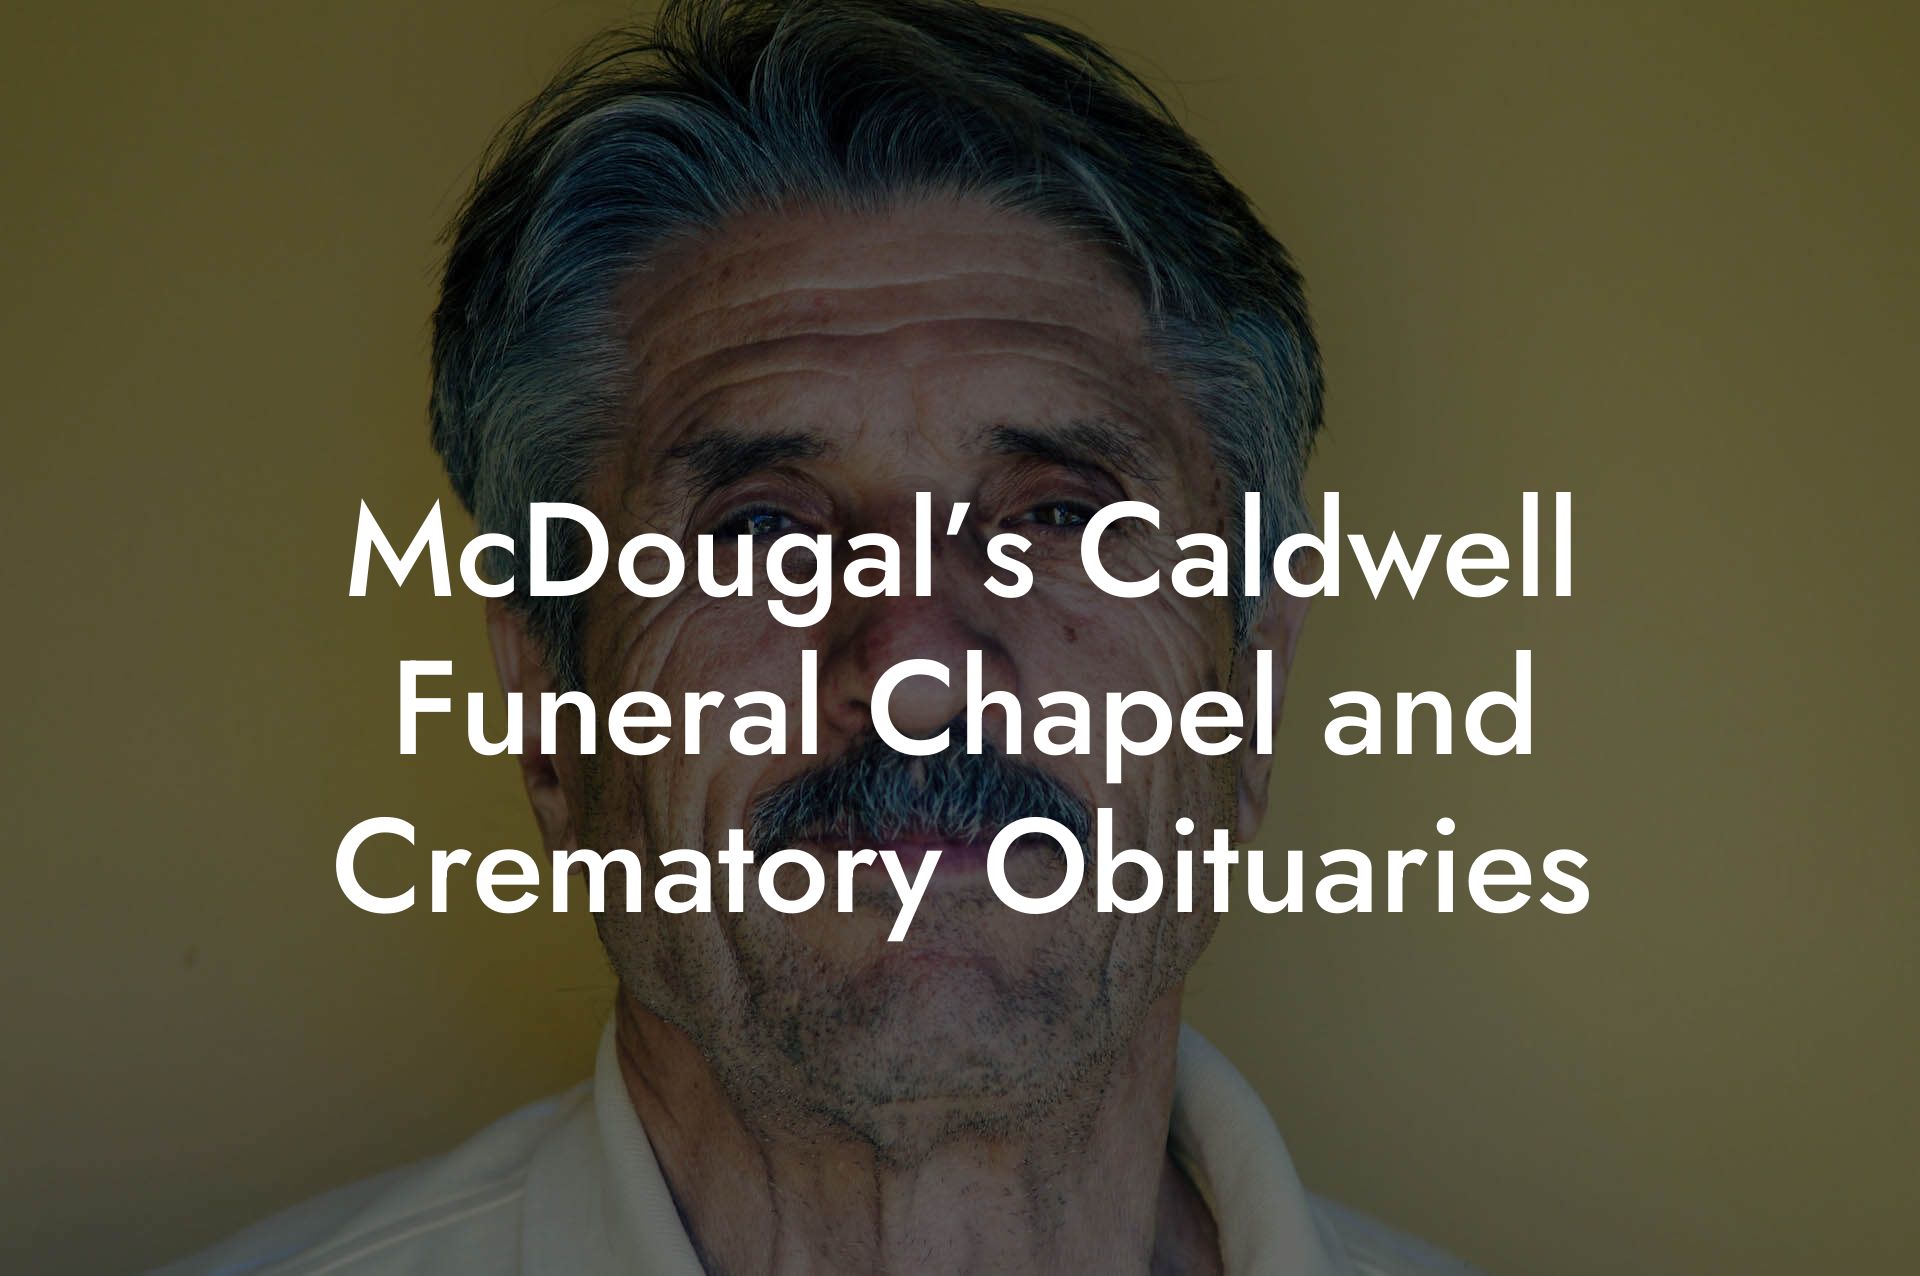 McDougal’s Caldwell Funeral Chapel and Crematory Obituaries